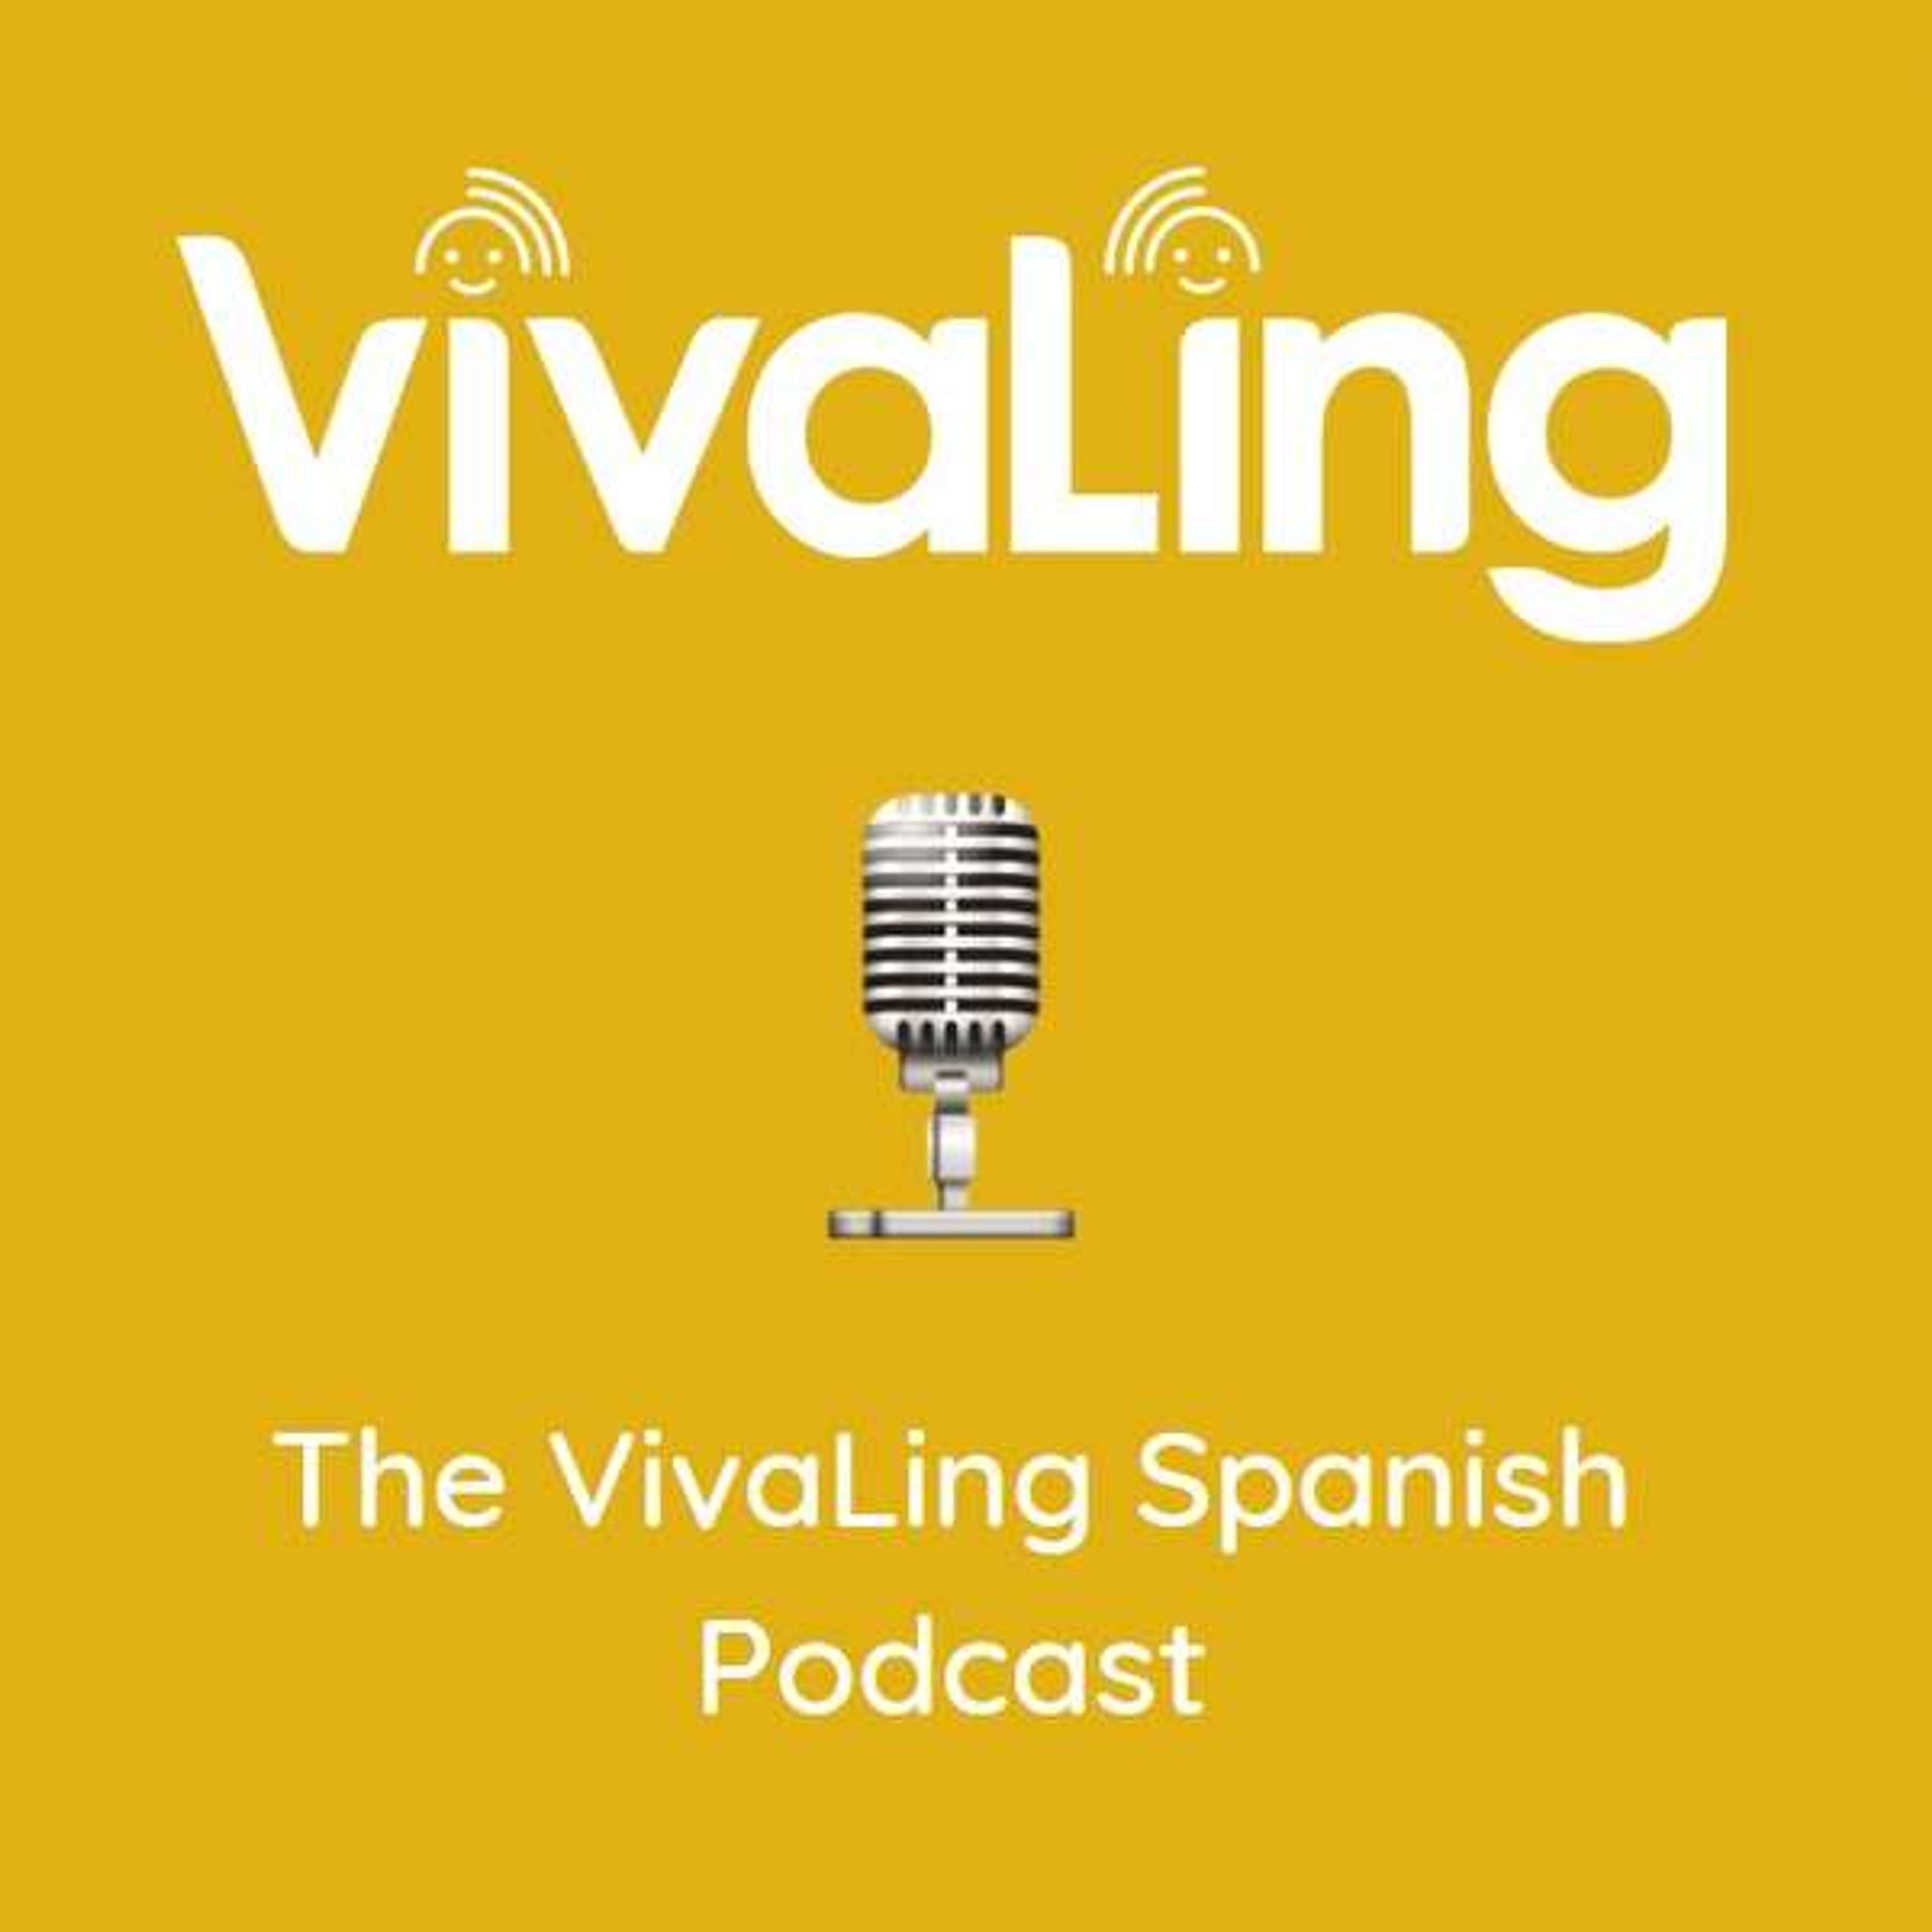 Introduction to the Vivaling Spanish Podcast